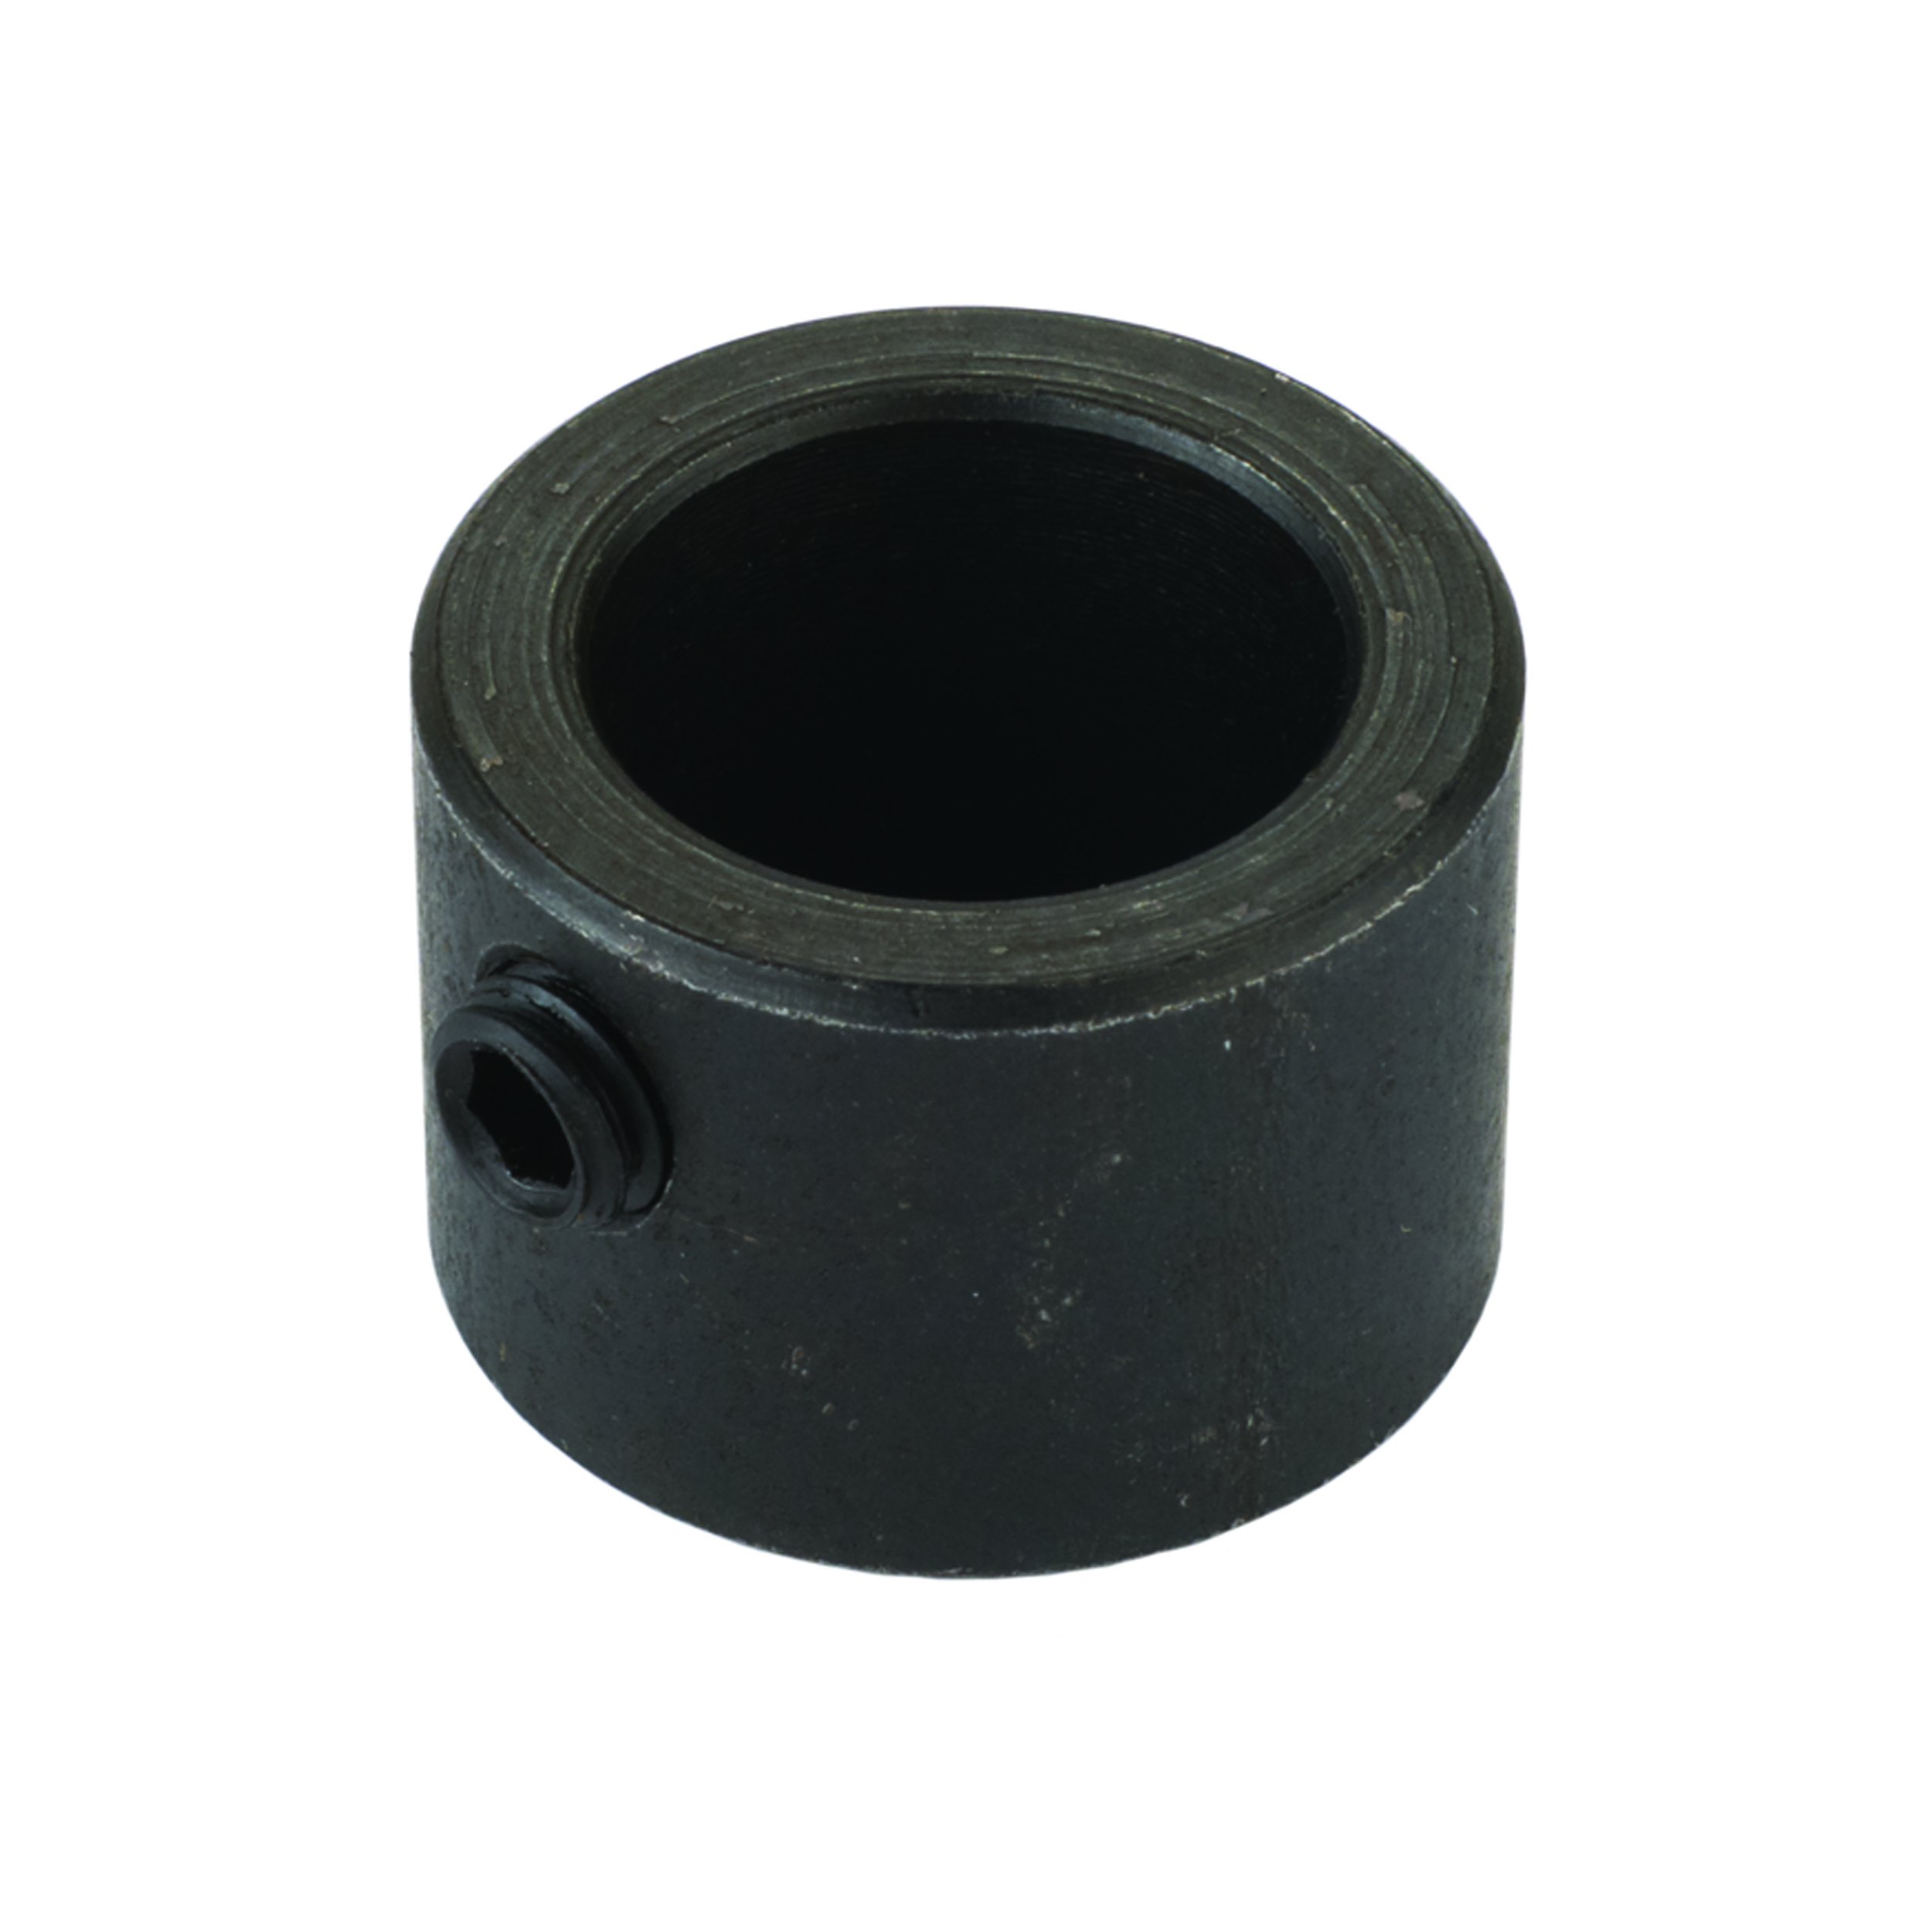 1/2-inch Stop Collar For Countersinks